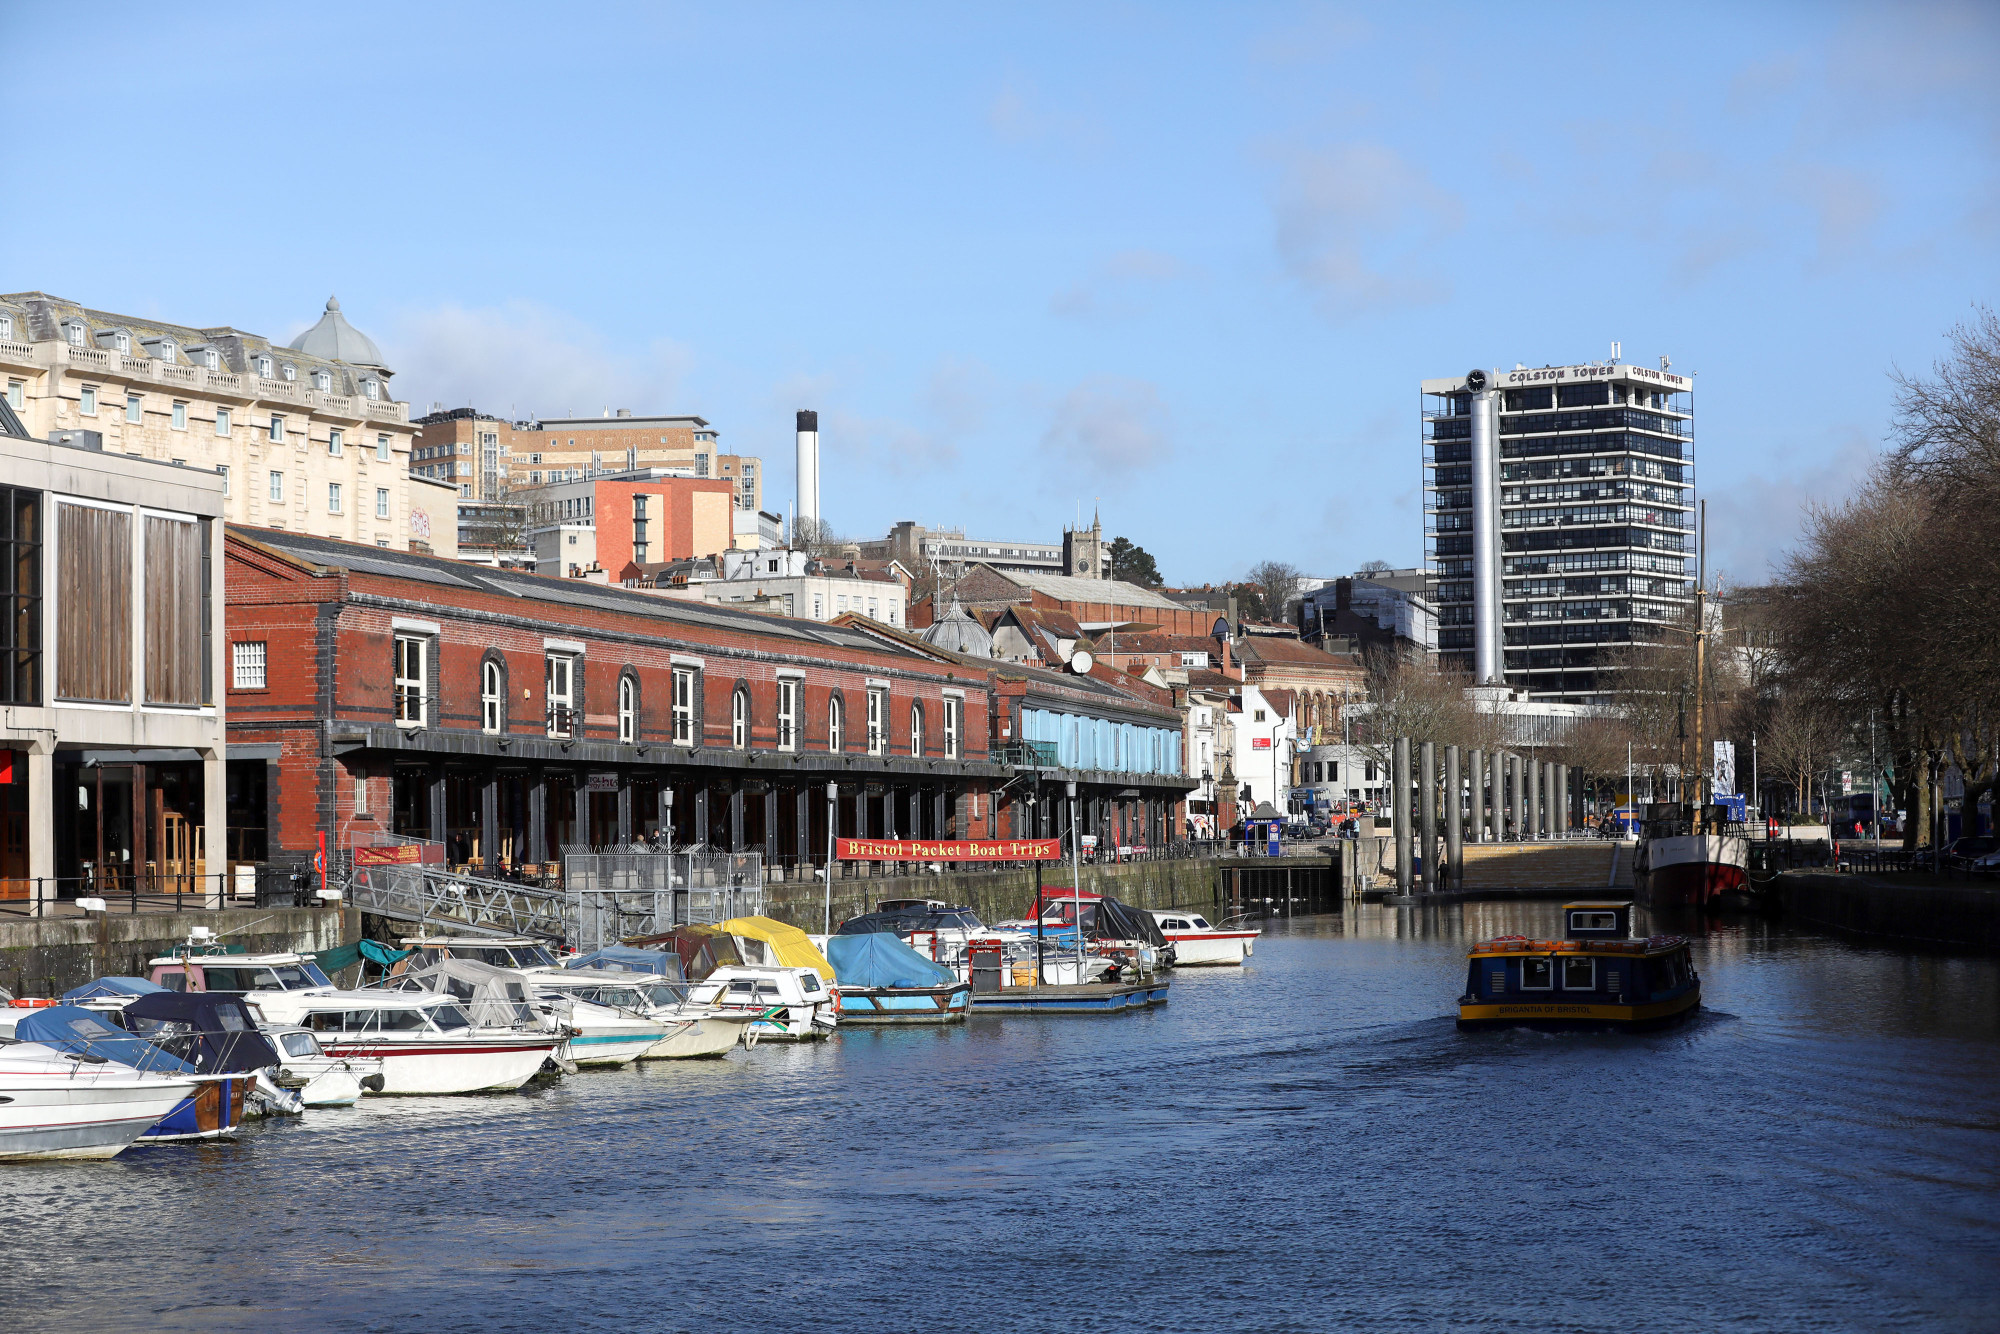 Boats sit moored on the harborside as a river ferry passes by in Bristol, U.K.
